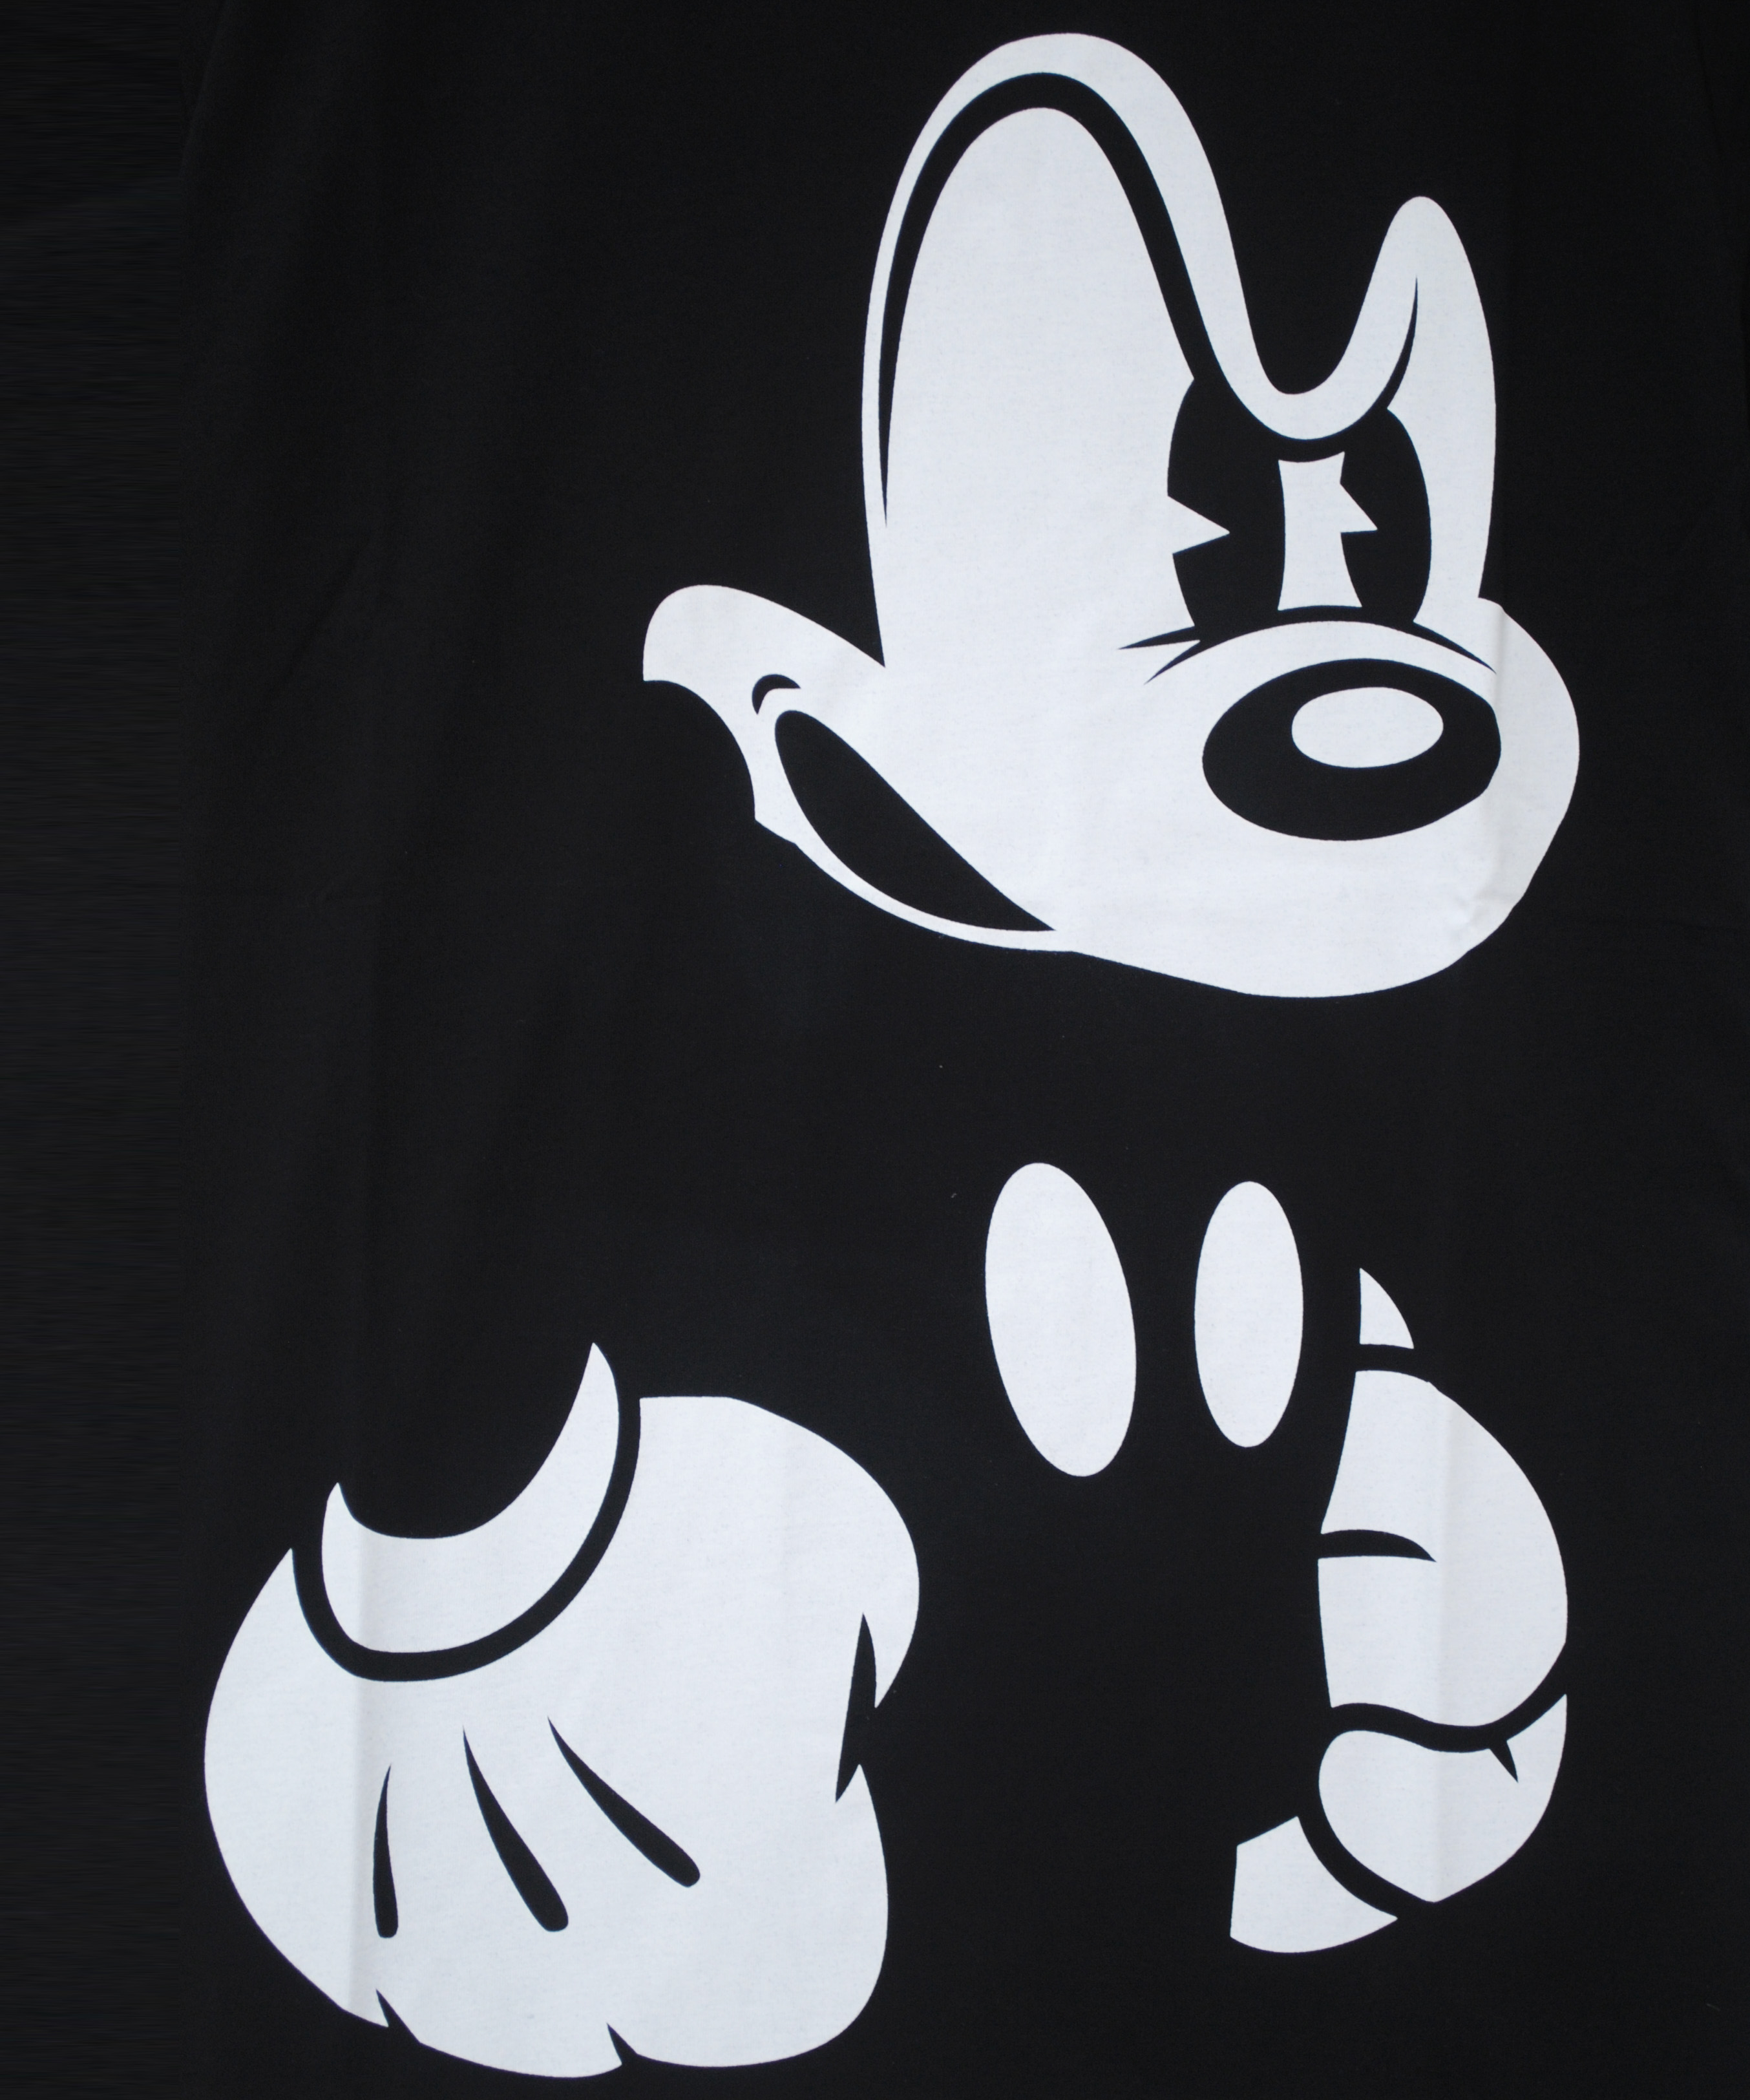 Bad Black Crew Neck Tee T-shirt Mickey Mouse Hands - Mickey Mouse Dope Wallpaper Hd - HD Wallpaper 